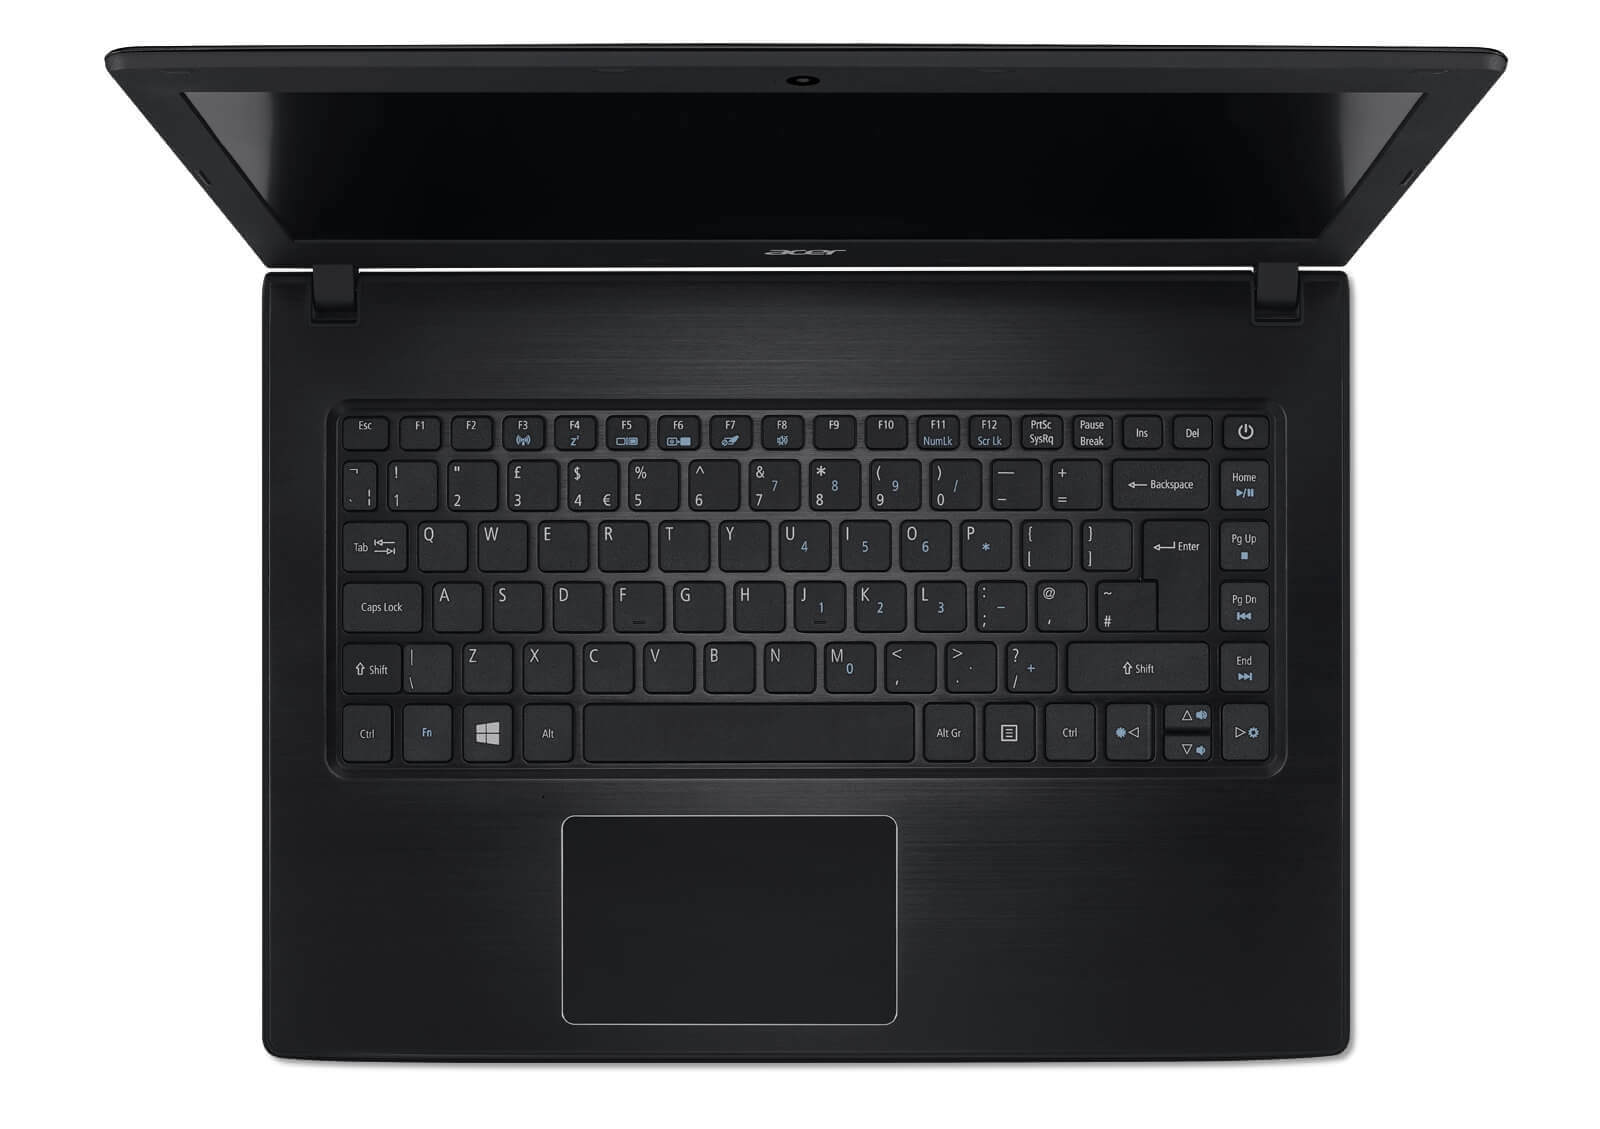 Notebook Acer TravelMate P249 and P259